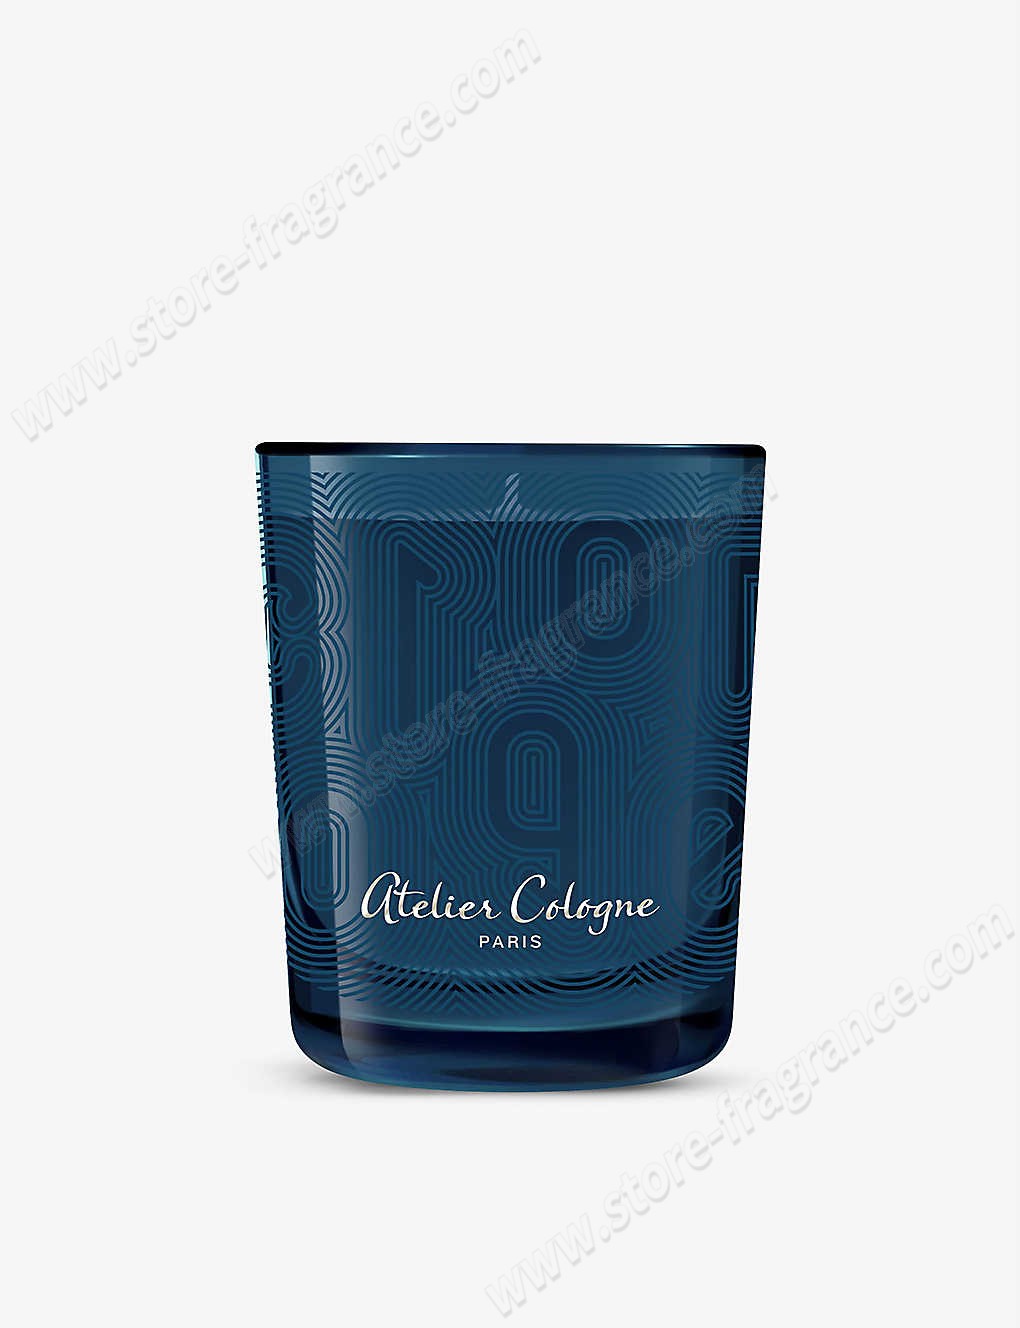 ATELIER COLOGNE/Oolang Wuyi scented candle 180g ✿ Discount Store - ATELIER COLOGNE/Oolang Wuyi scented candle 180g ✿ Discount Store